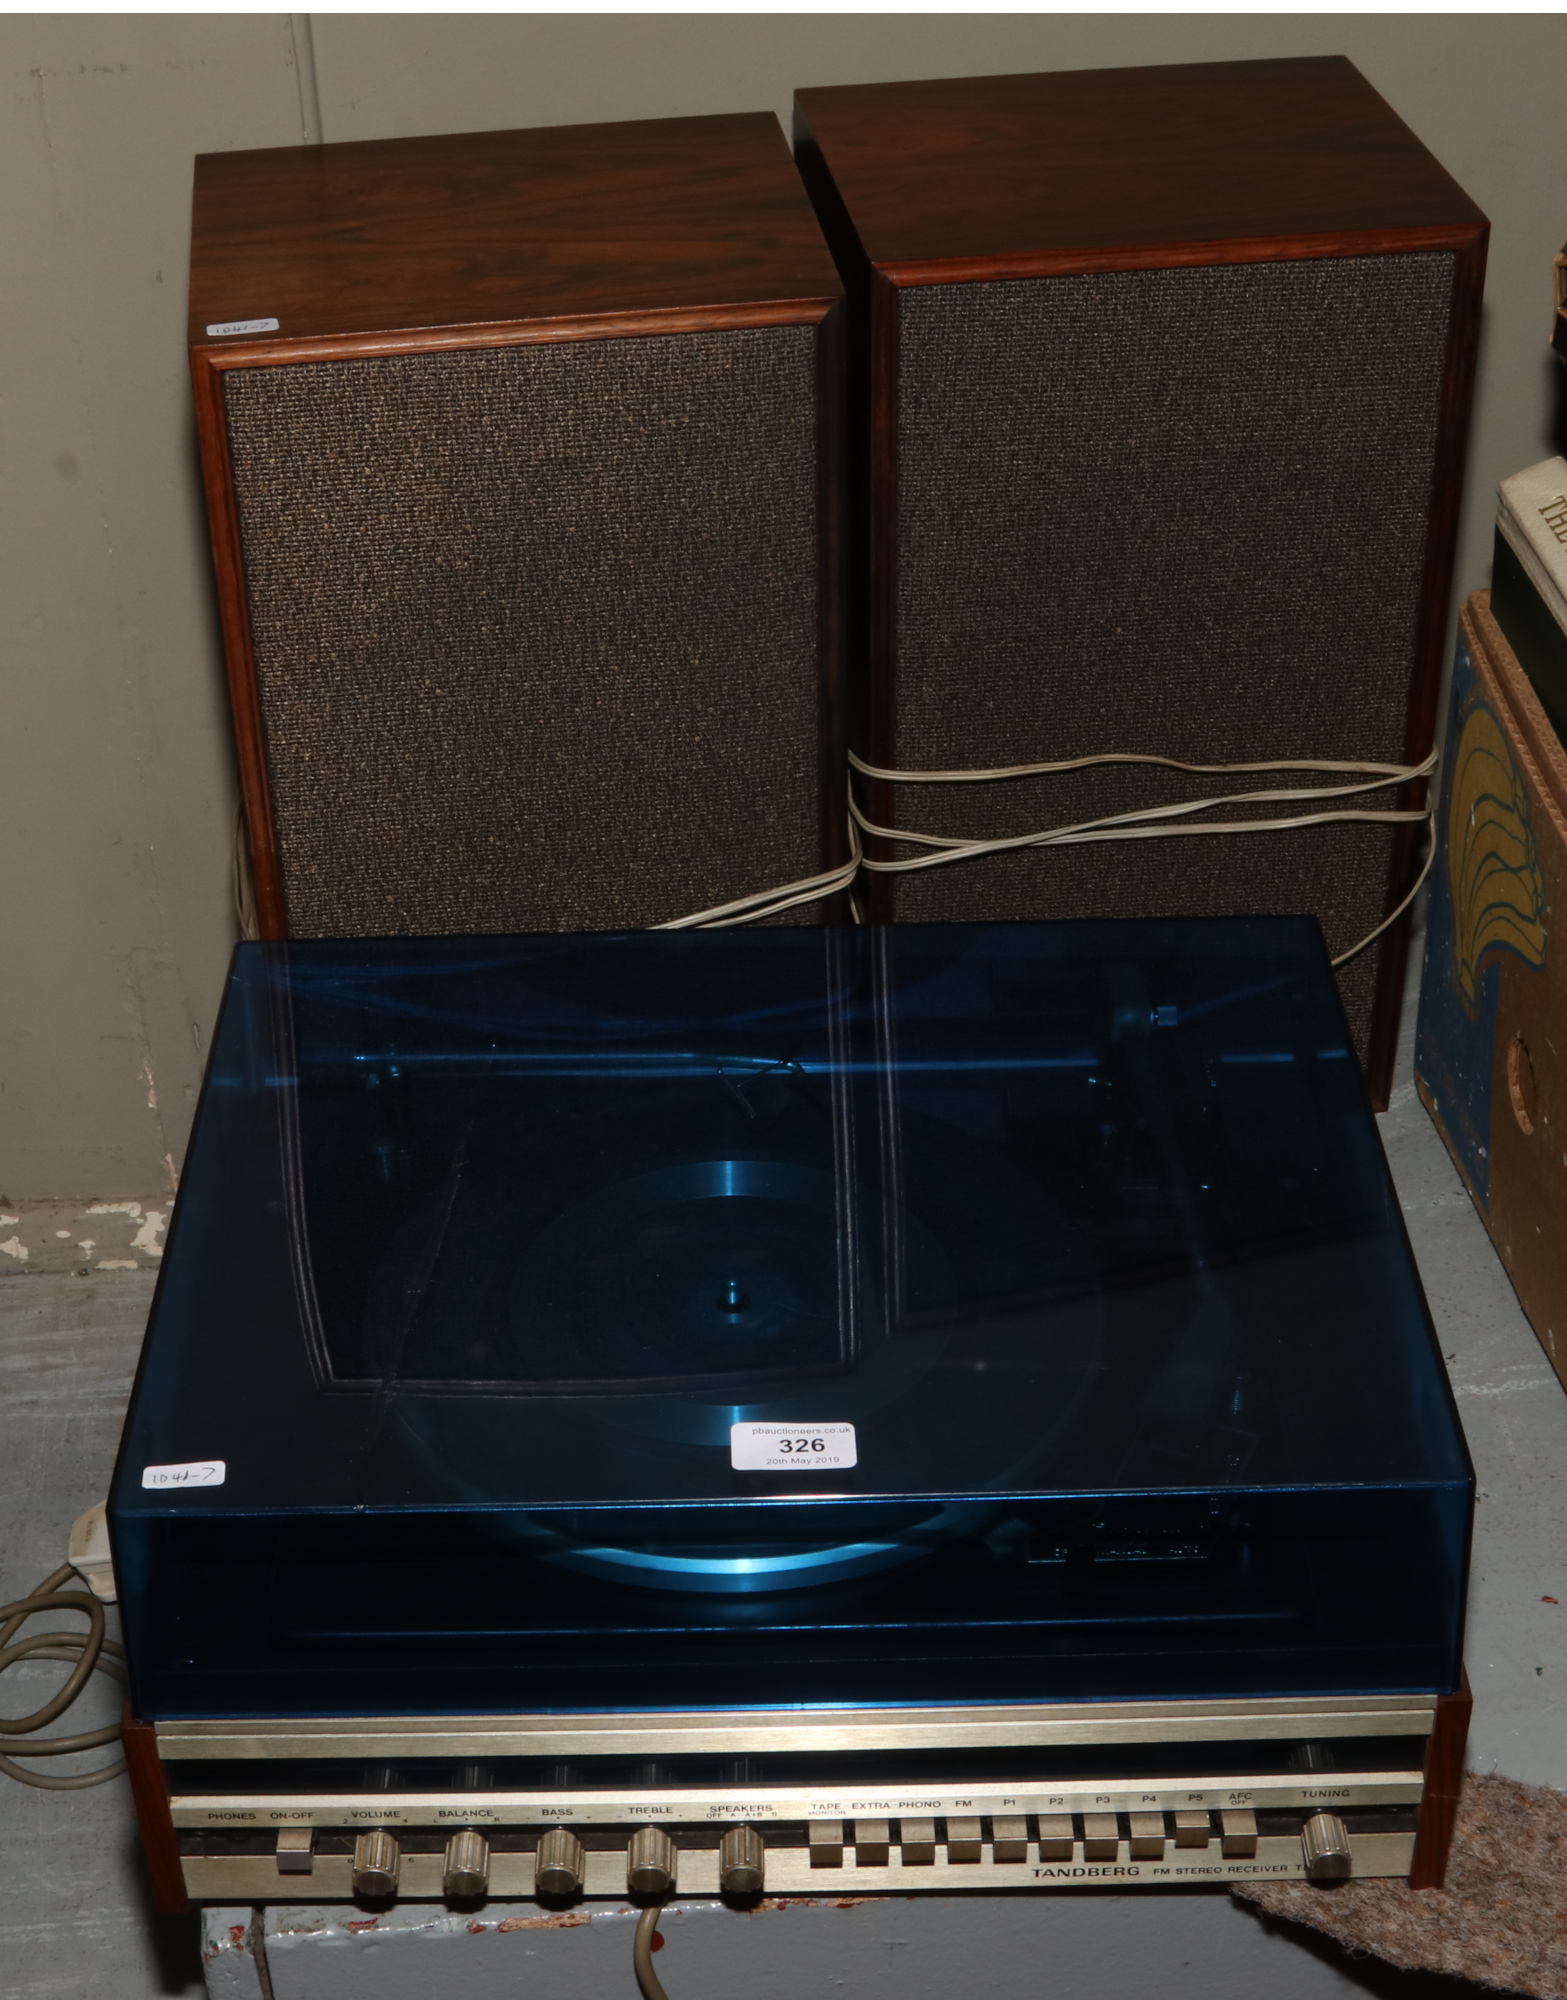 A Tandberg FM stereo receiver TR-200 with Garrard turntable, along with a pair of matching